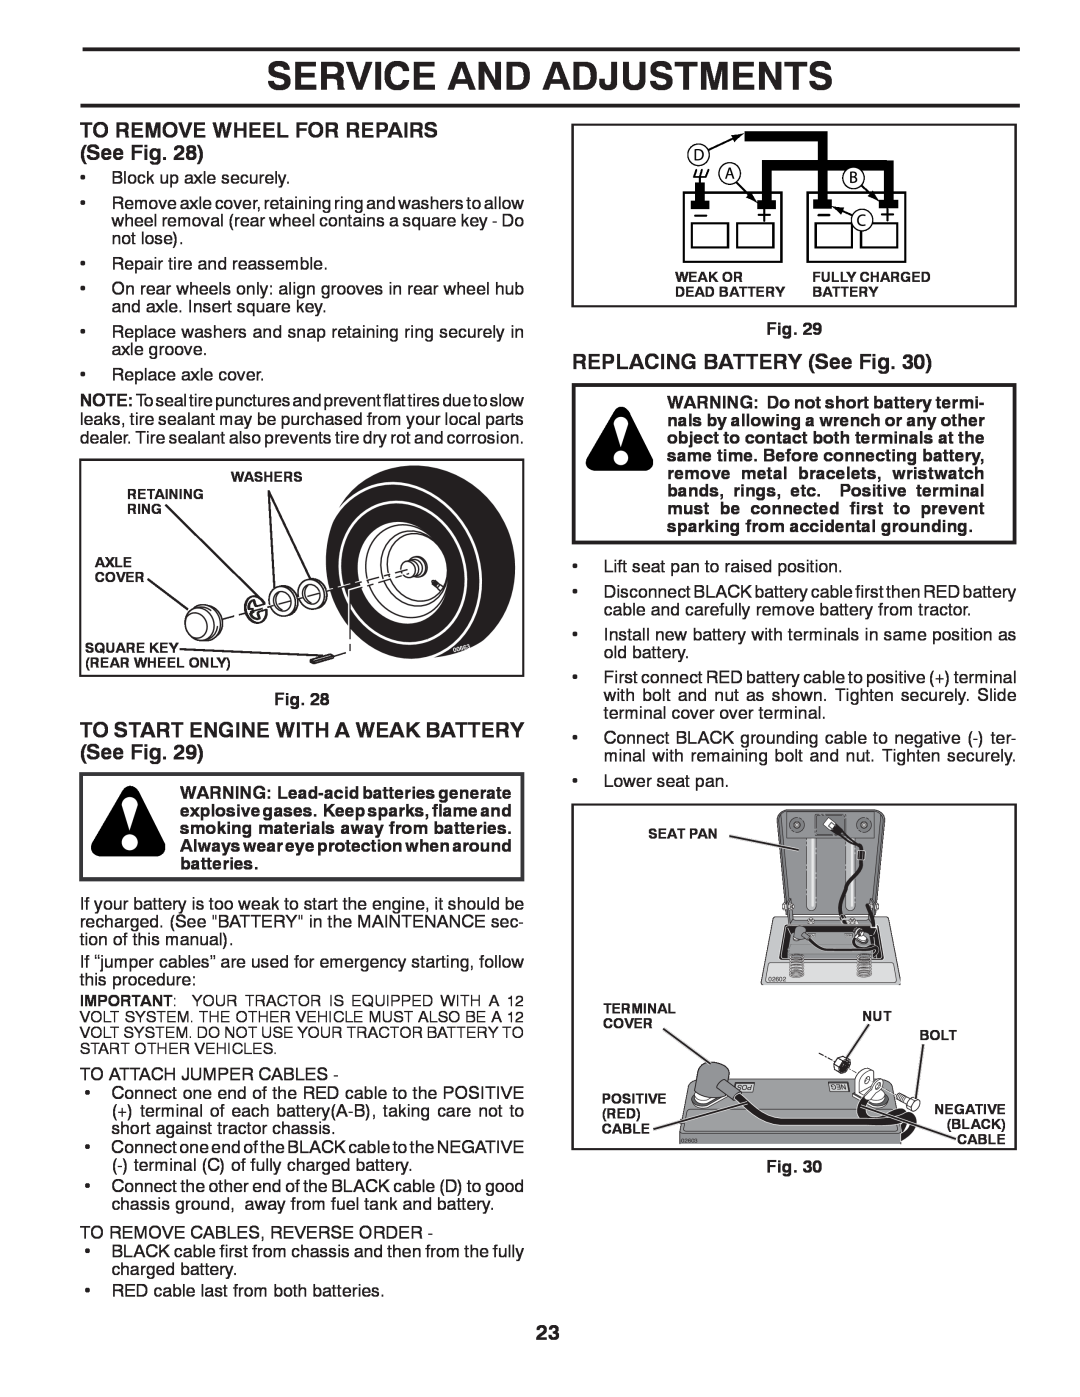 McCulloch 96041011600 manual TO REMOVE WHEEL FOR REPAIRS See Fig, TO START ENGINE WITH A WEAK BATTERY See Fig 